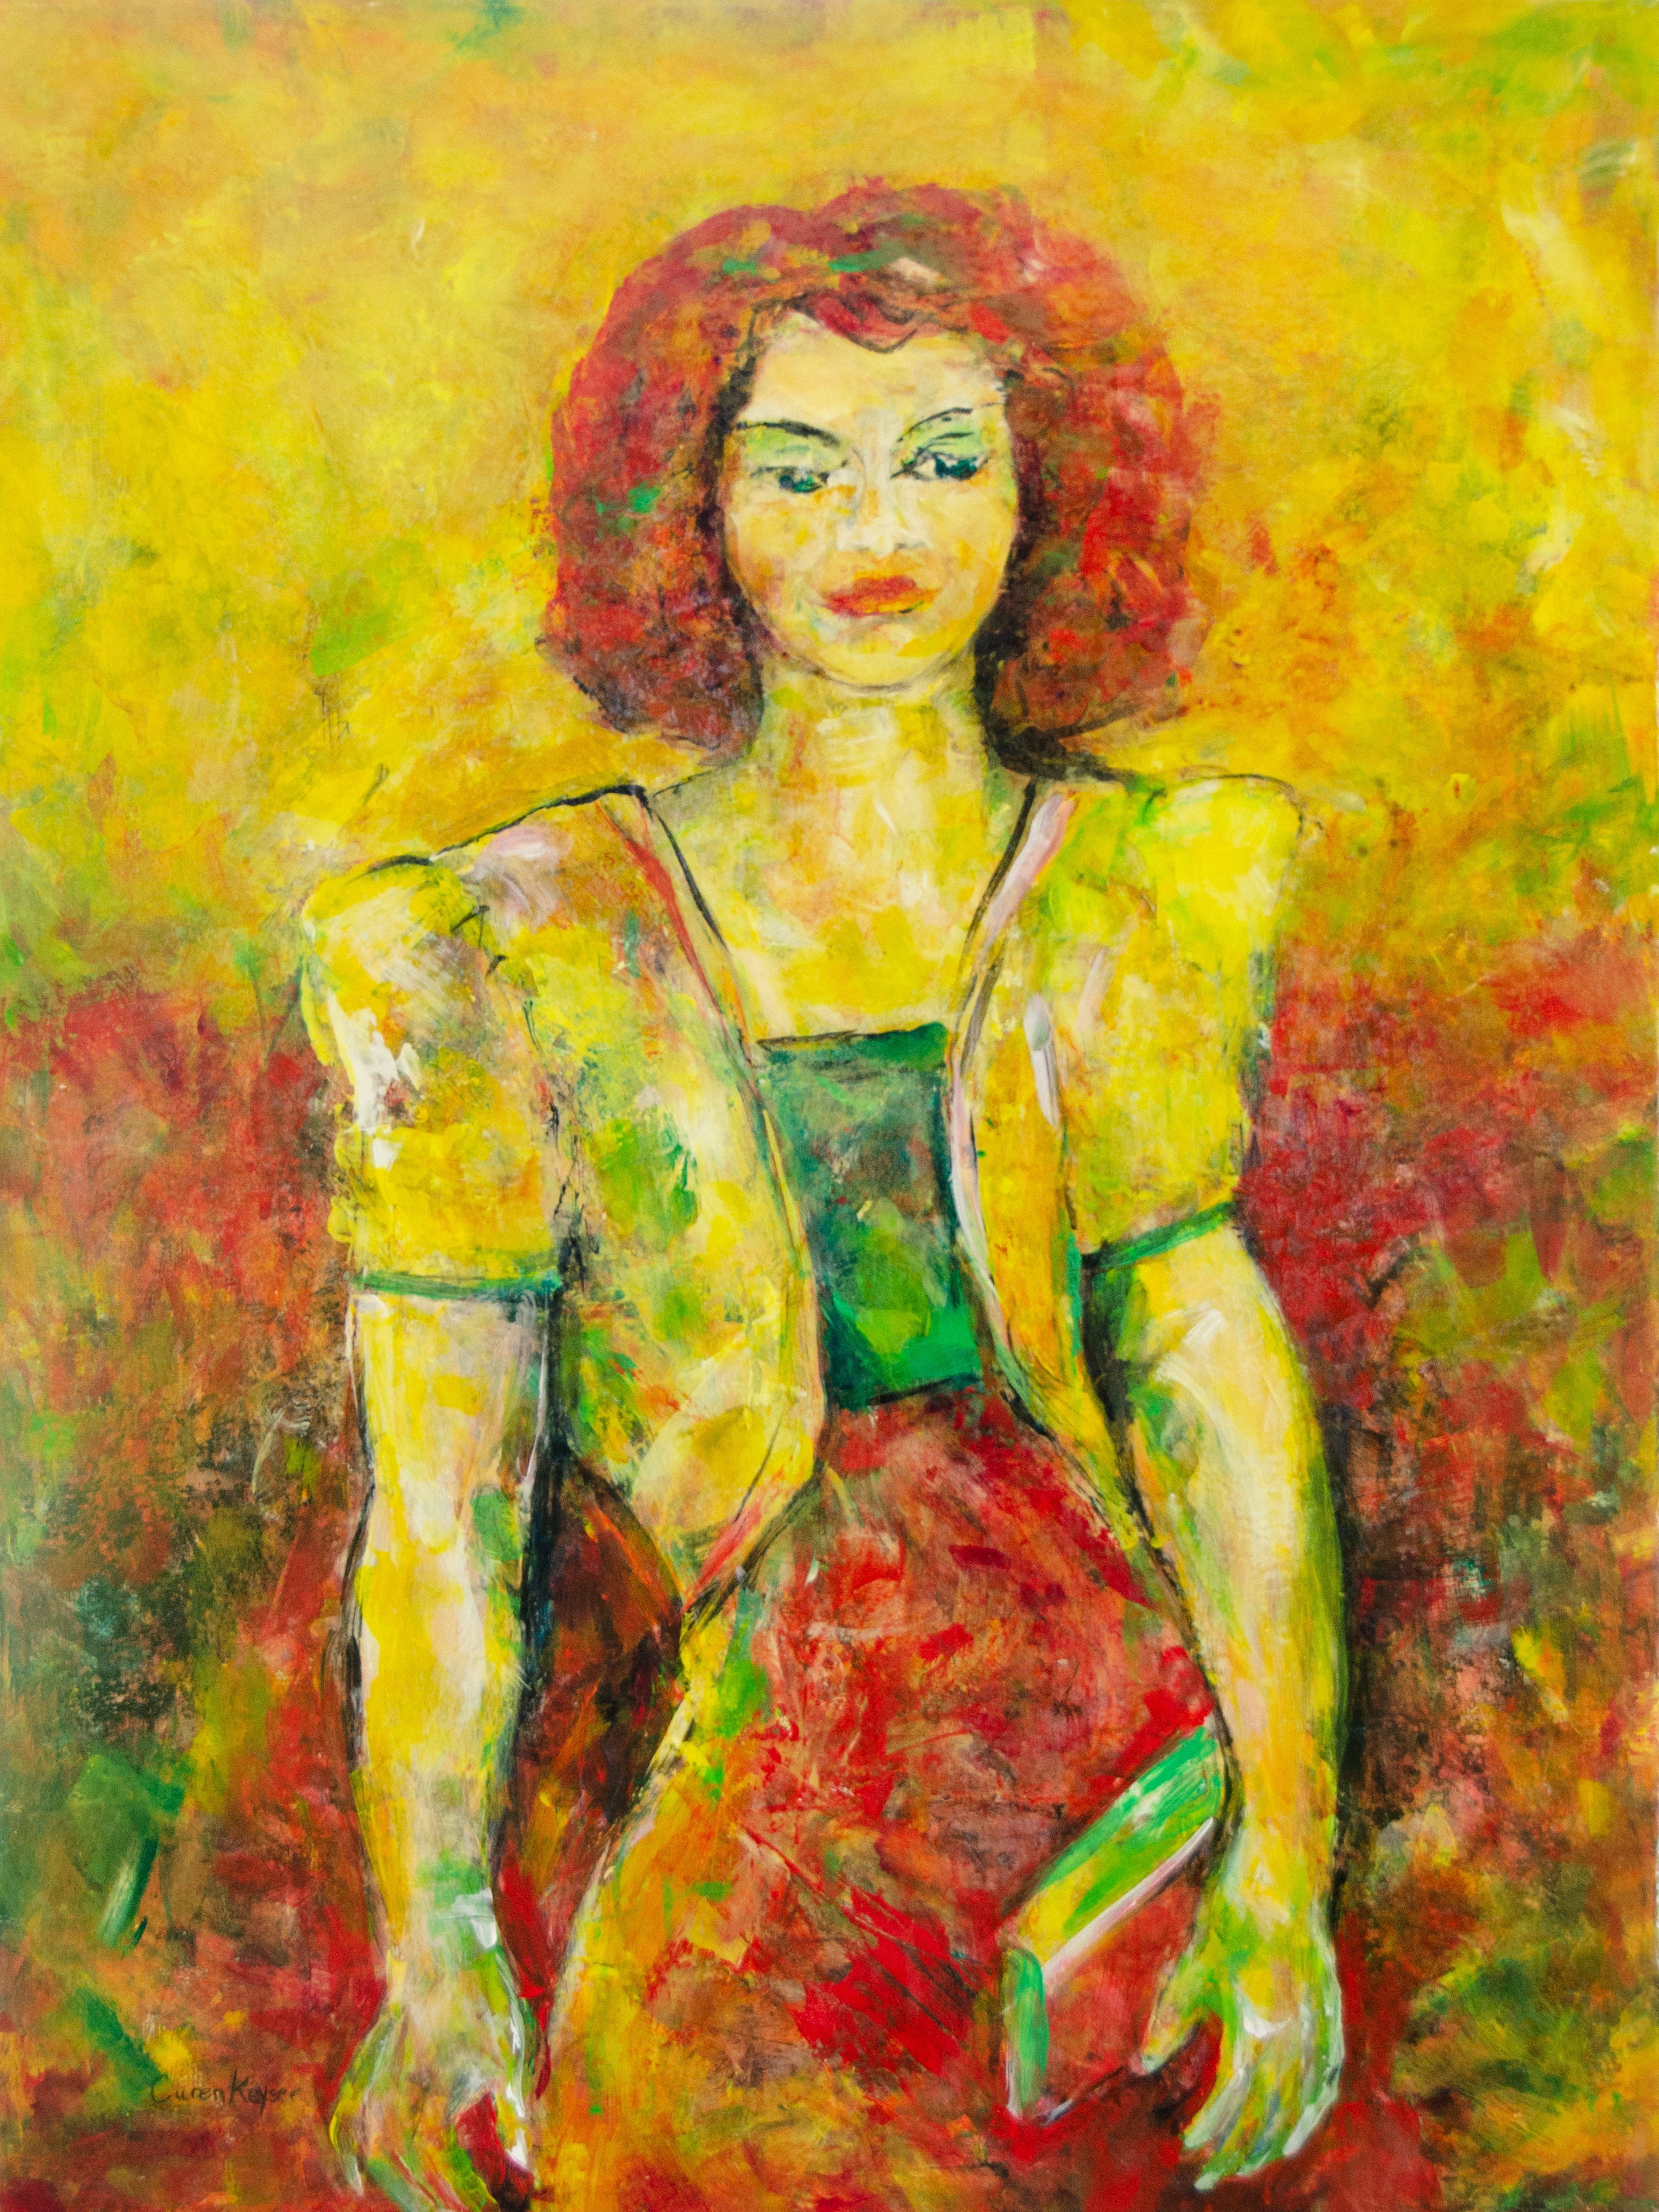 Caren Keyser, 'Yellow Jacket', 2018, original Painting Acrylic, 18 x 24  cm. Artwork description: 1911 This painting has grown out of many many layers of acrylic paint.  The woman is wearing a yellow jacket with padded shoulders and carrying a clutch purse.  Her red hair is in brilliant contrast to the yellow energetic background.  The lower red background abounds with interesting brush ...